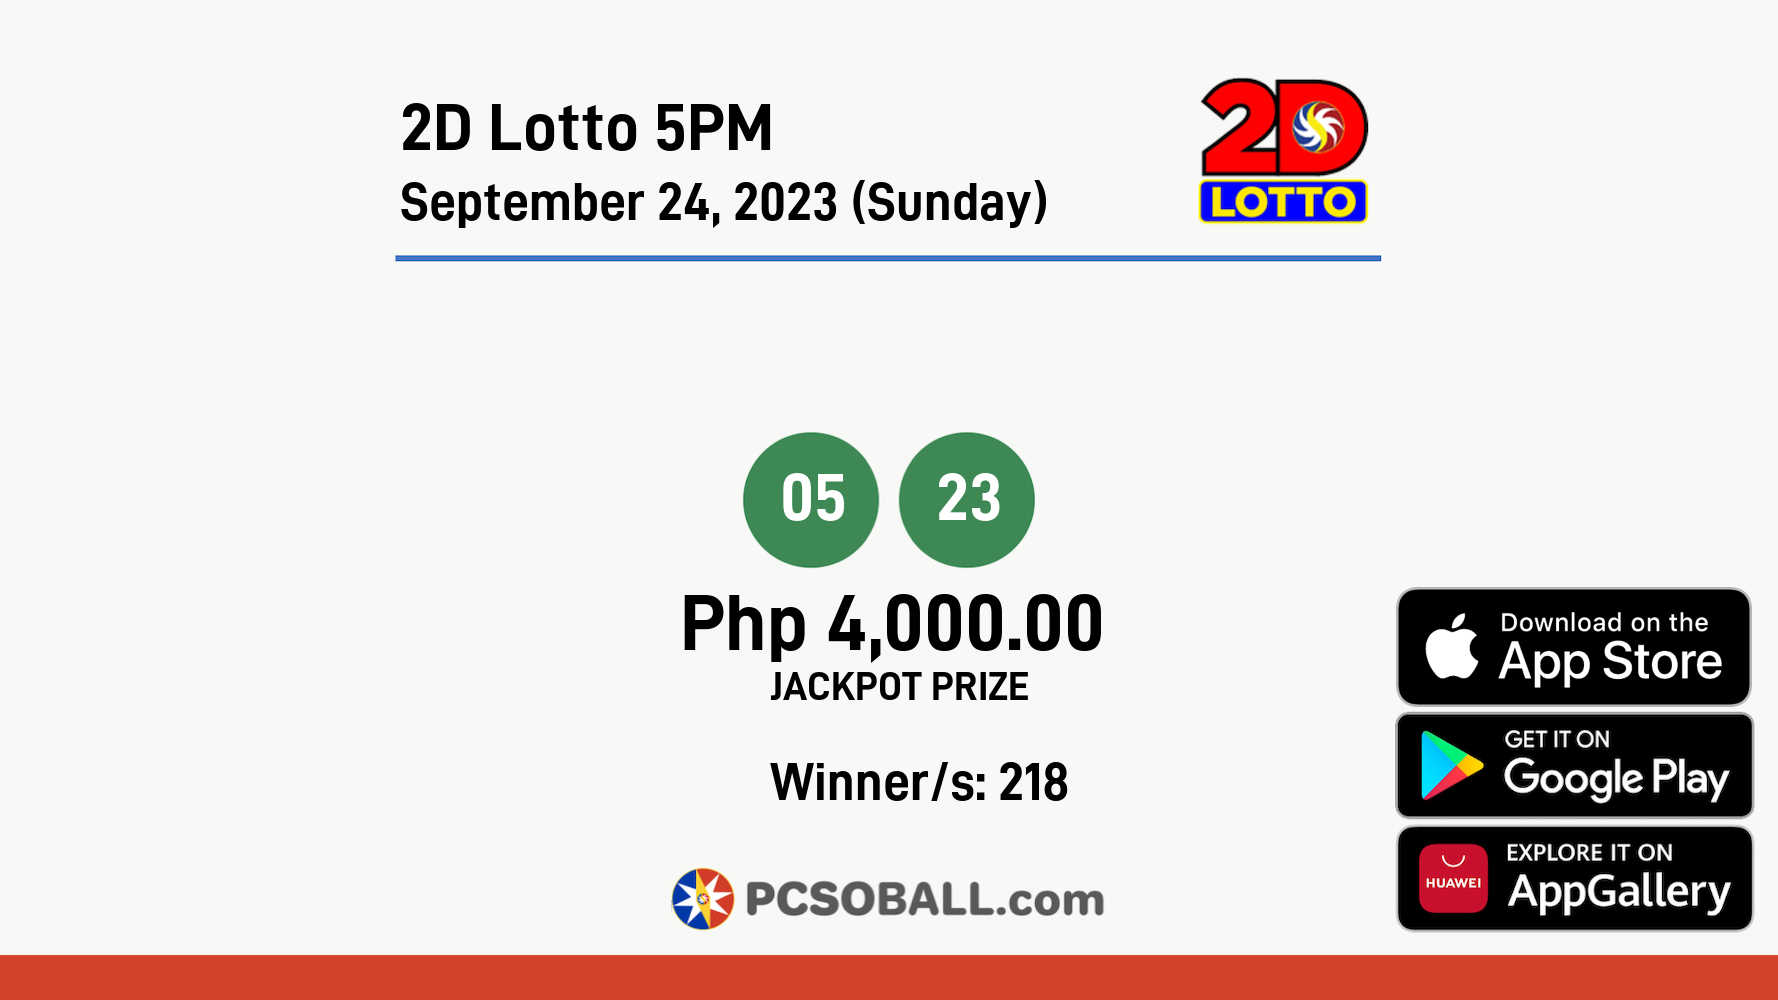 2D Lotto 5PM September 24, 2023 (Sunday) Result